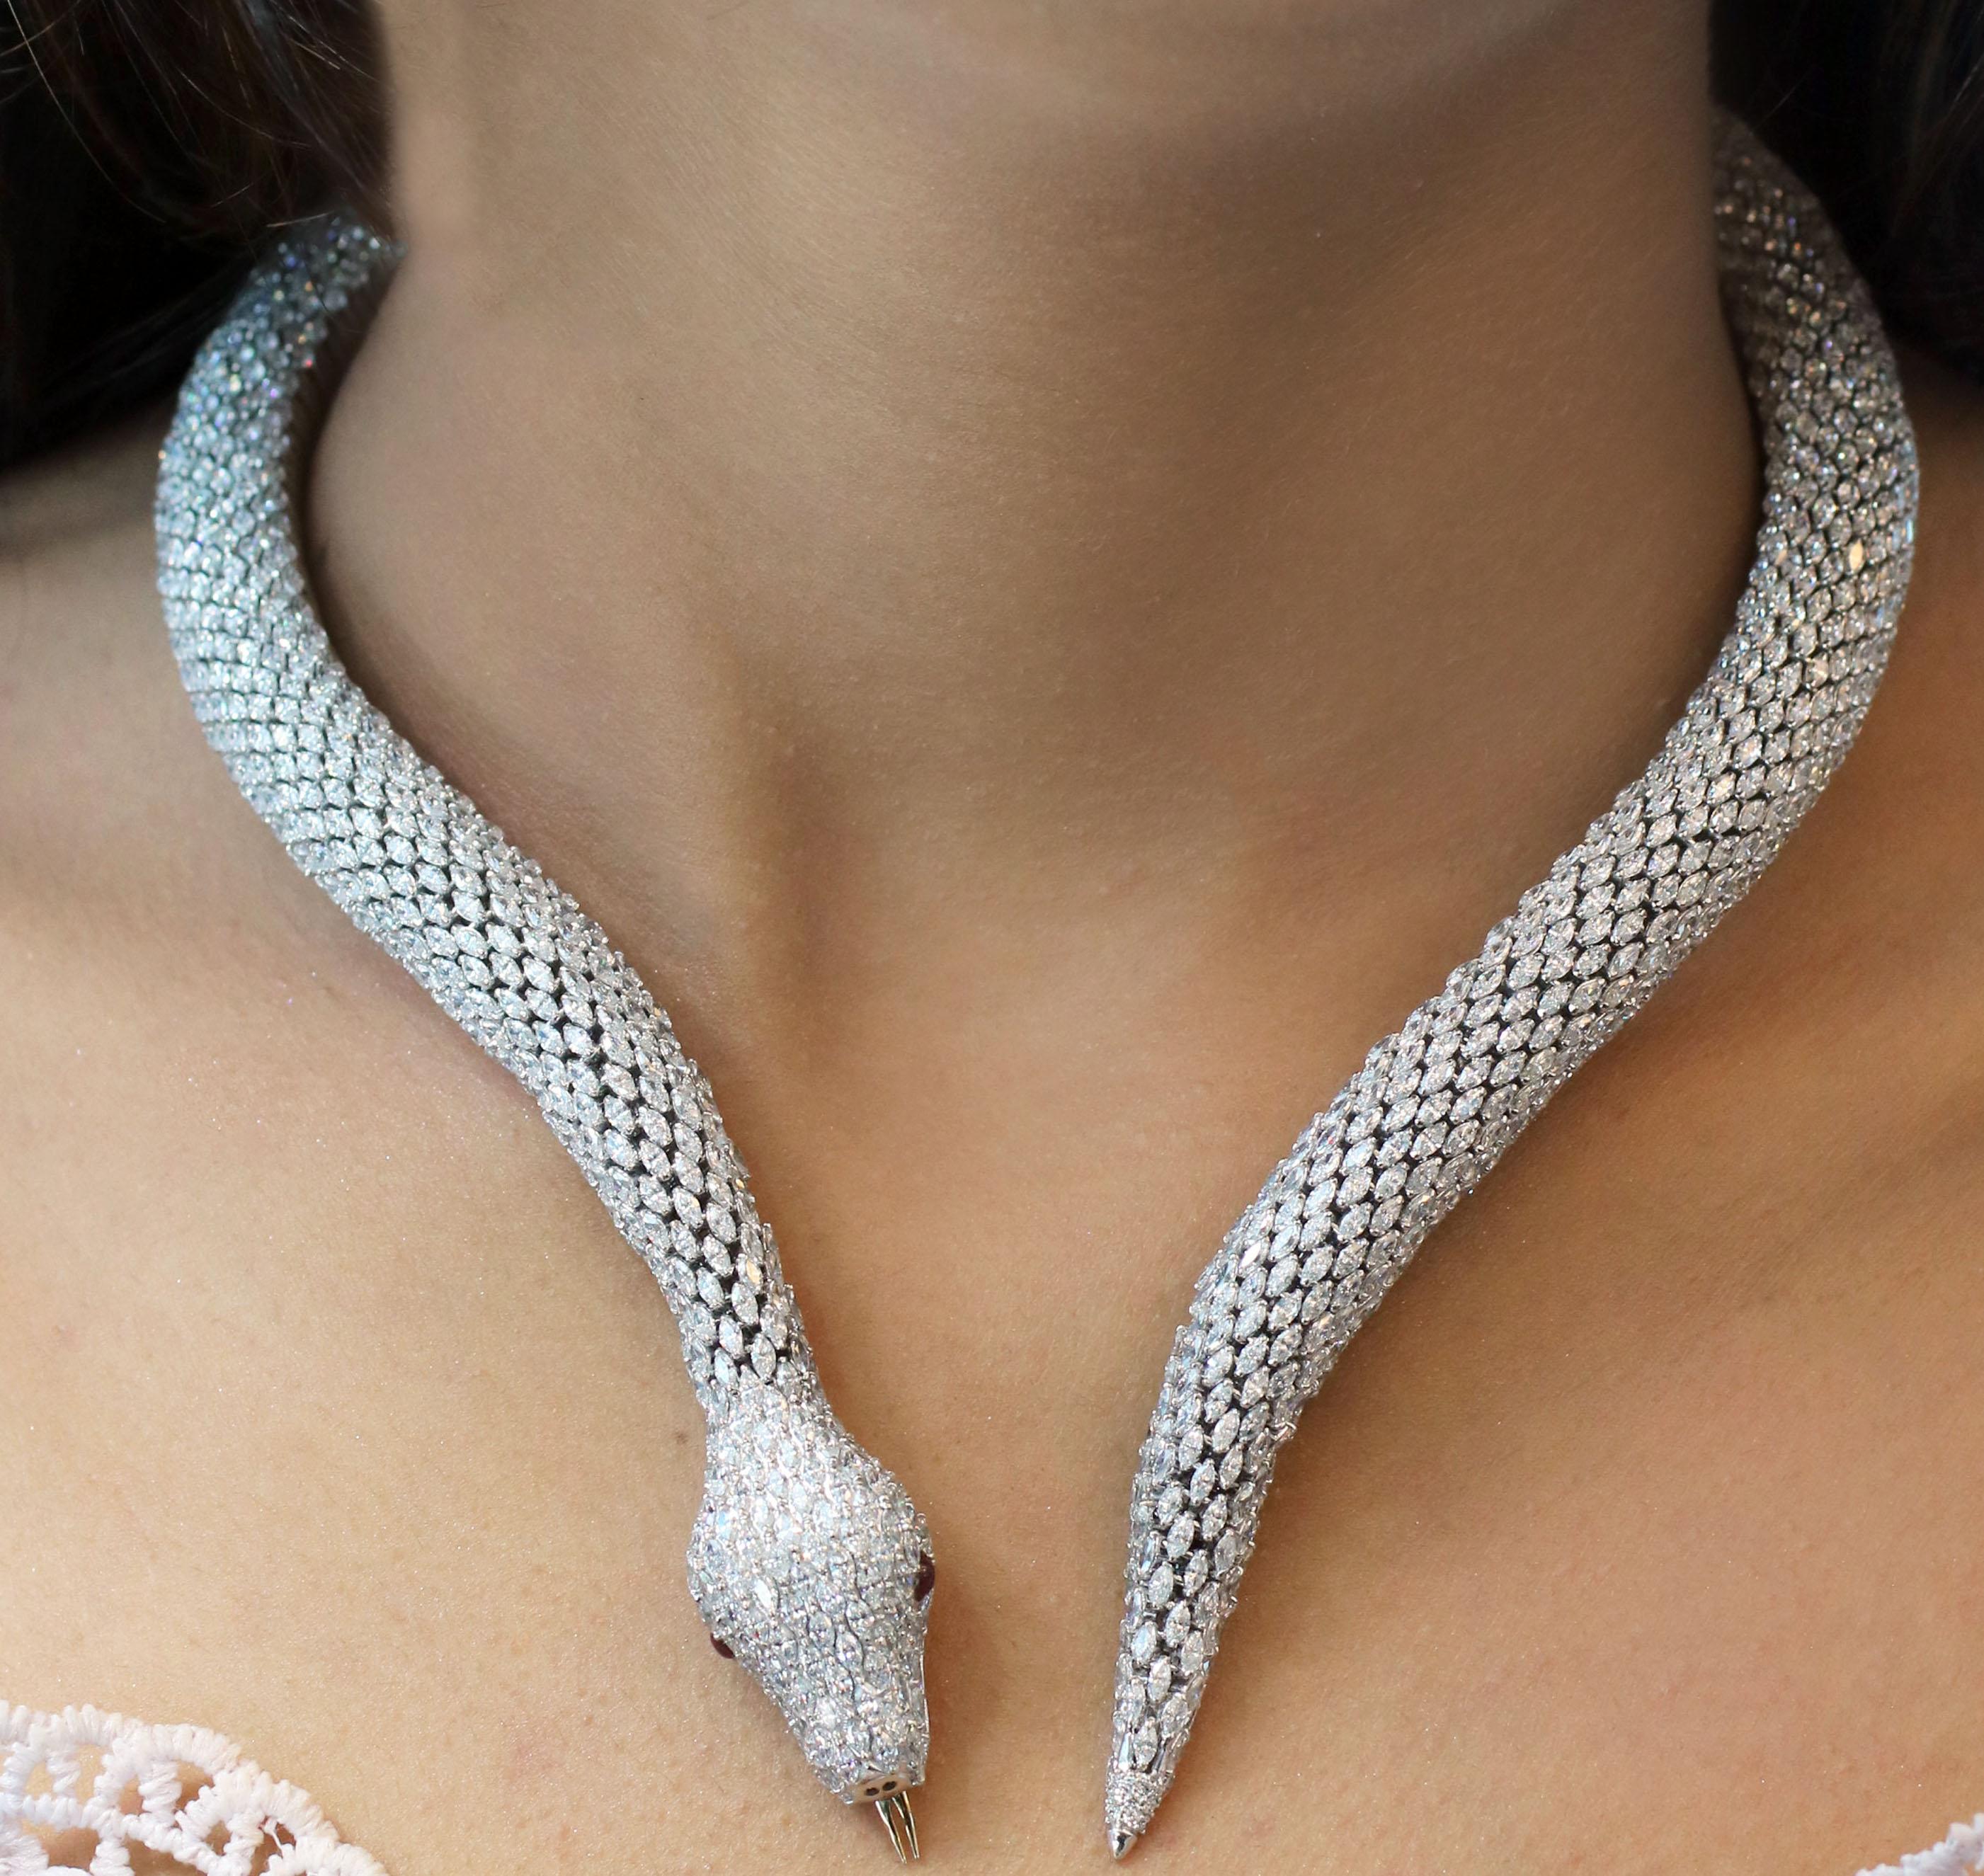 Gross Weight: 223.58 Grams
Diamond Weight: 68.84 cts
Colour Stone Weight: 0.27 cts
Neck Size: 13.5 inches
IGI Certified: Summary No: 25J155401808

Video of the product can be shared on request.

Our serpentine-inspired collar necklace recreates the